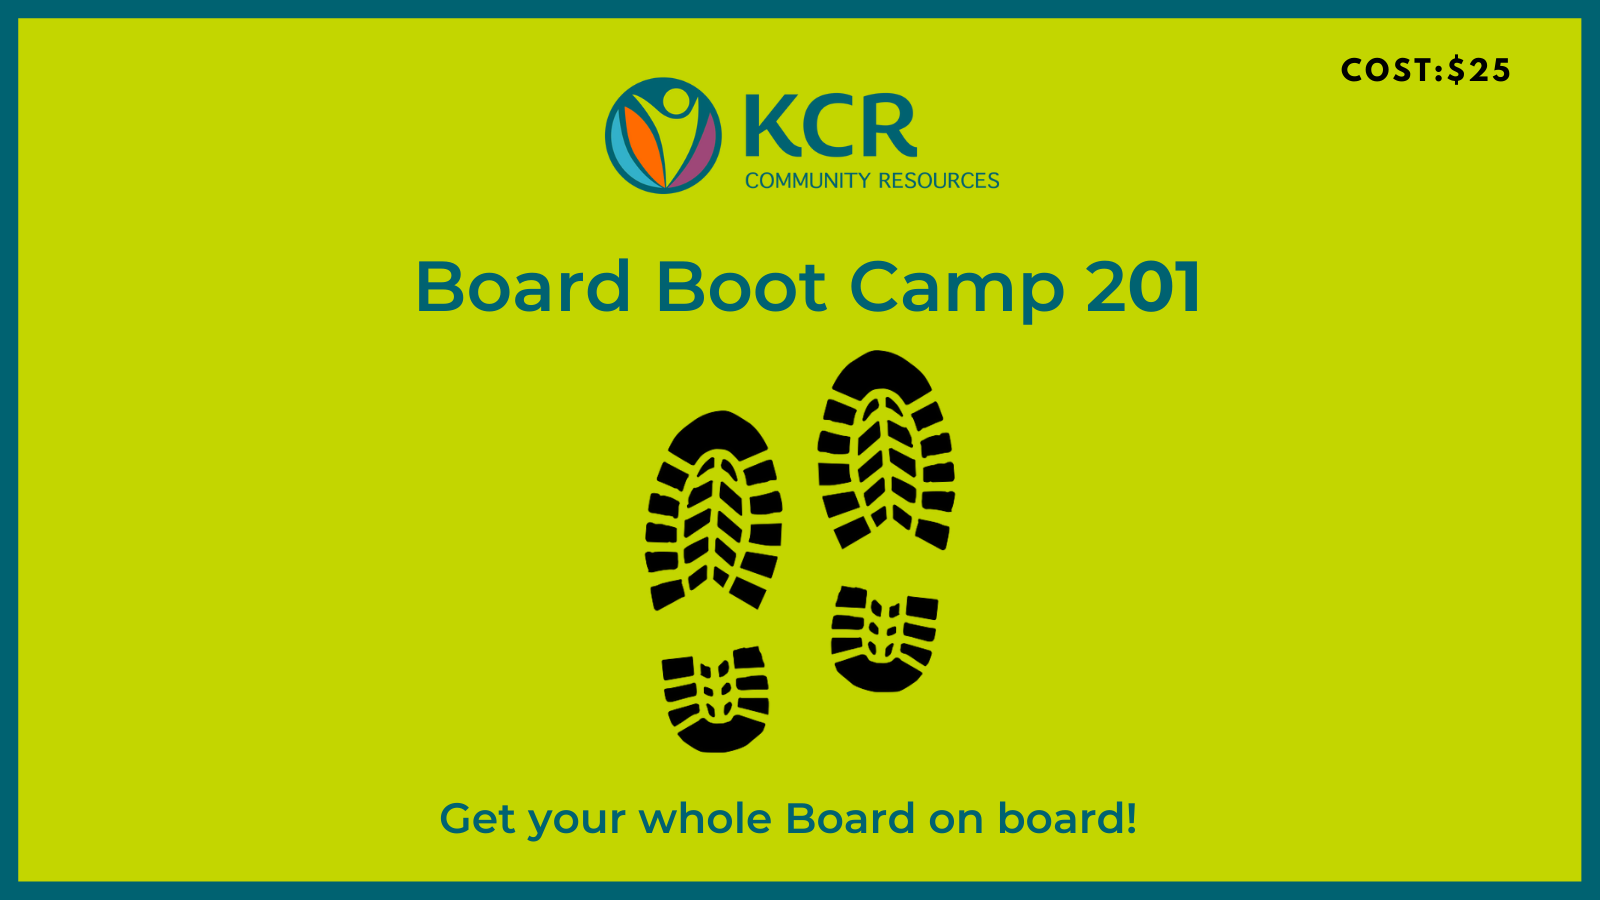 KCR Community Resources - Board Boot Camp 201 - Executive Committee